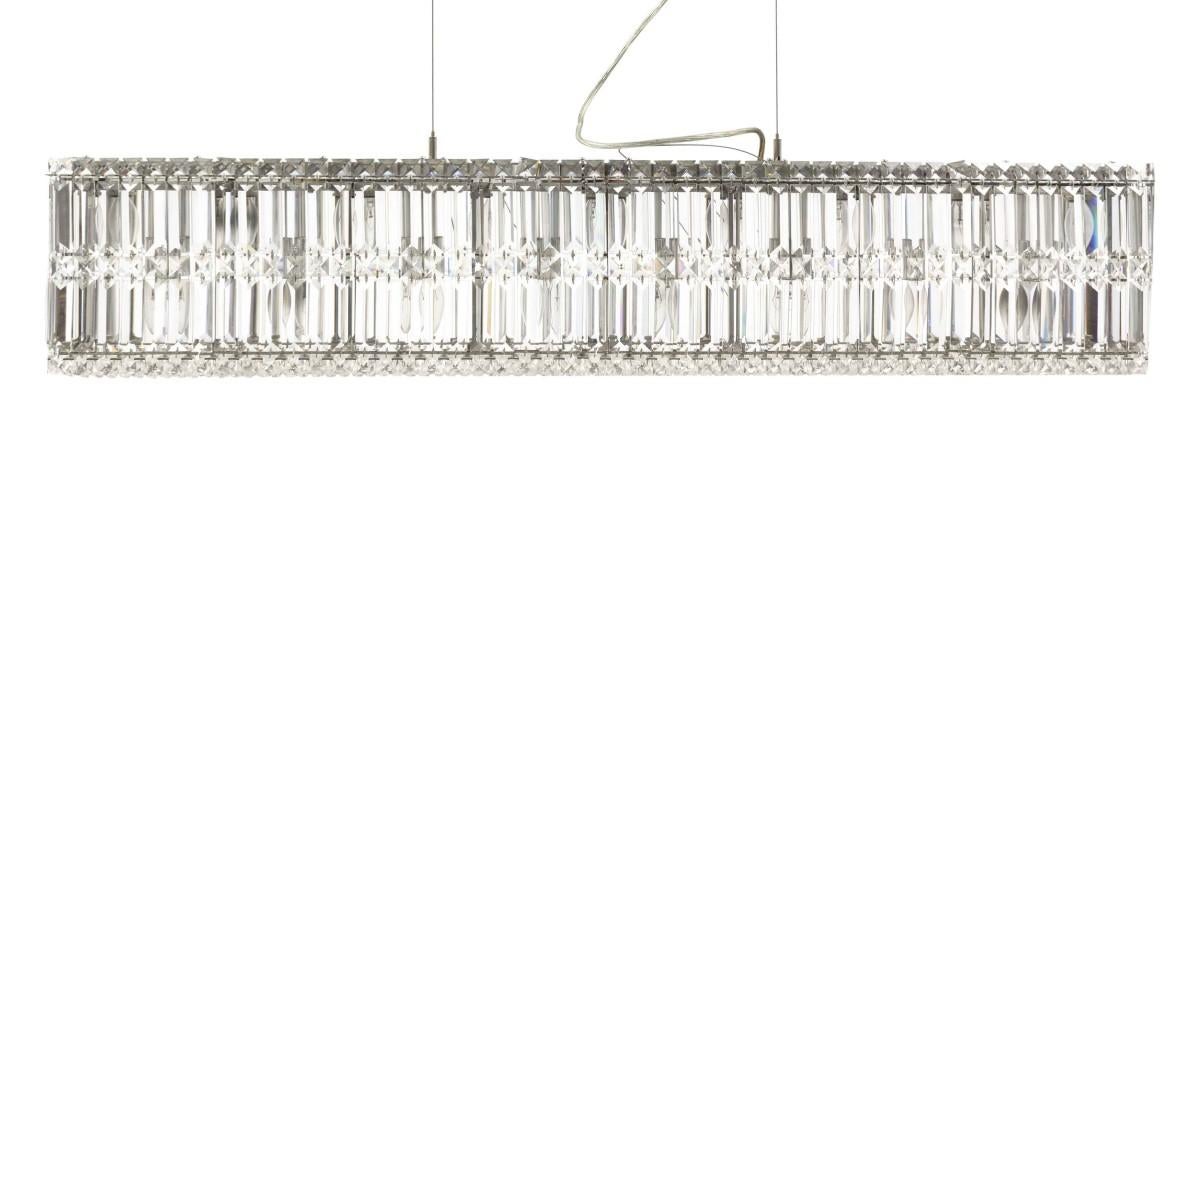 A quantum linear suspension hanging light fixture by Schonbek. 2010 production.

A stunning display of glamour as the two tiers of glistening crystal gems and pendeloques will dazzle the room with luxurious charm. This radiant linear suspension